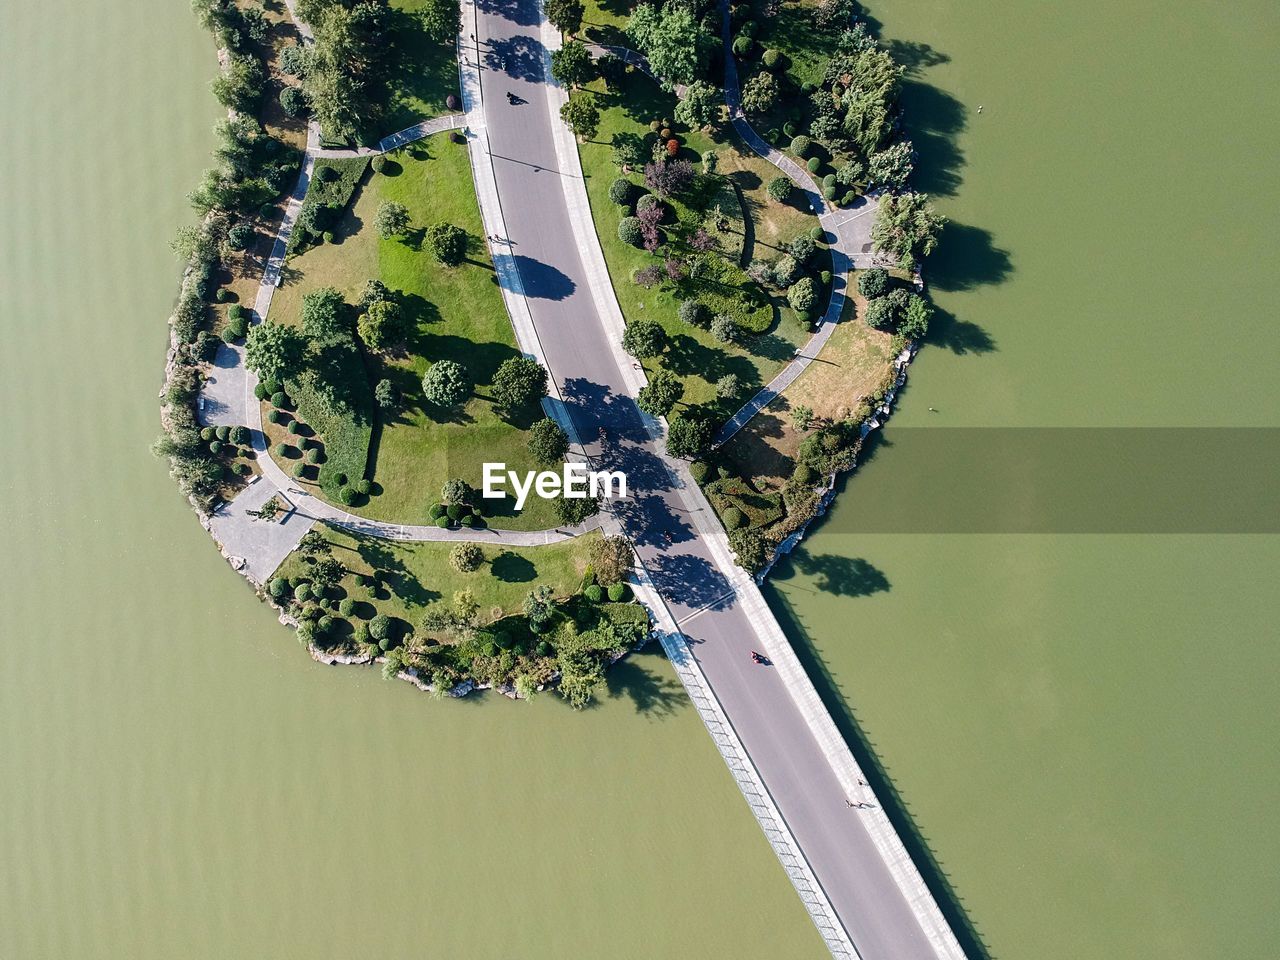 Aerial view of bridge and island over river